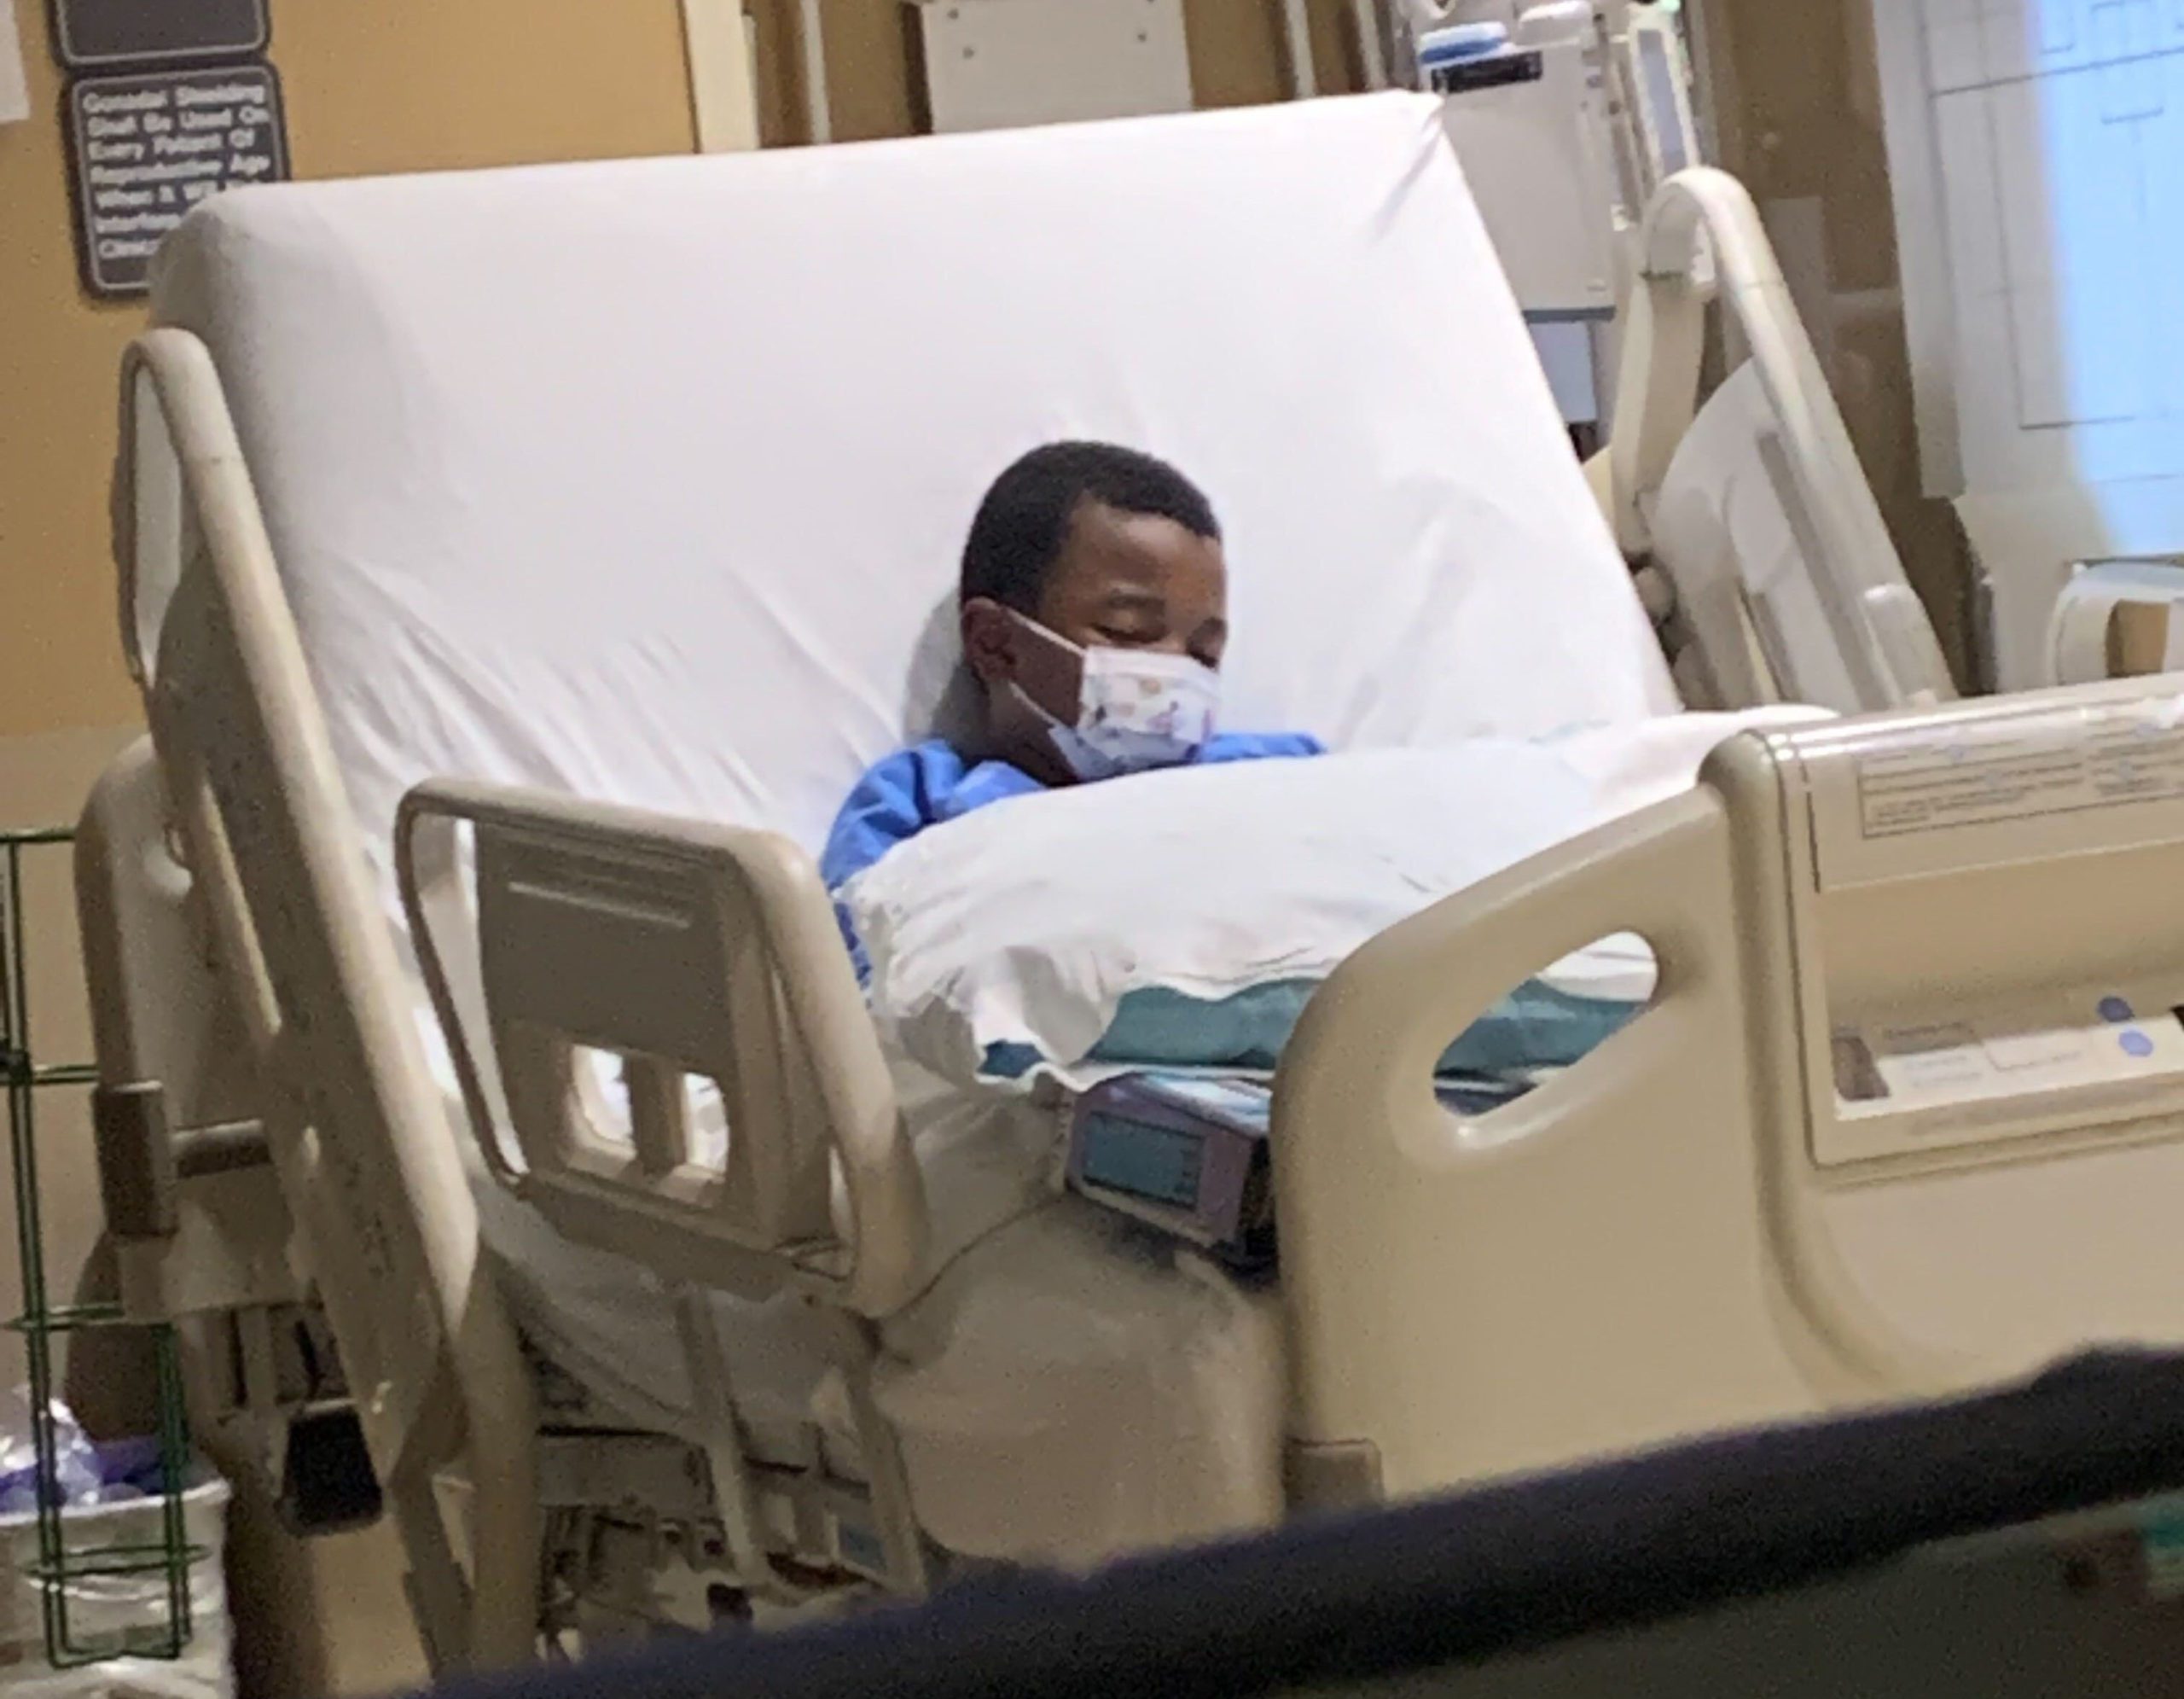 Khrystal Epps' son in his hospital bed. He developed worrying symptoms six weeks after recovering from COVID-19